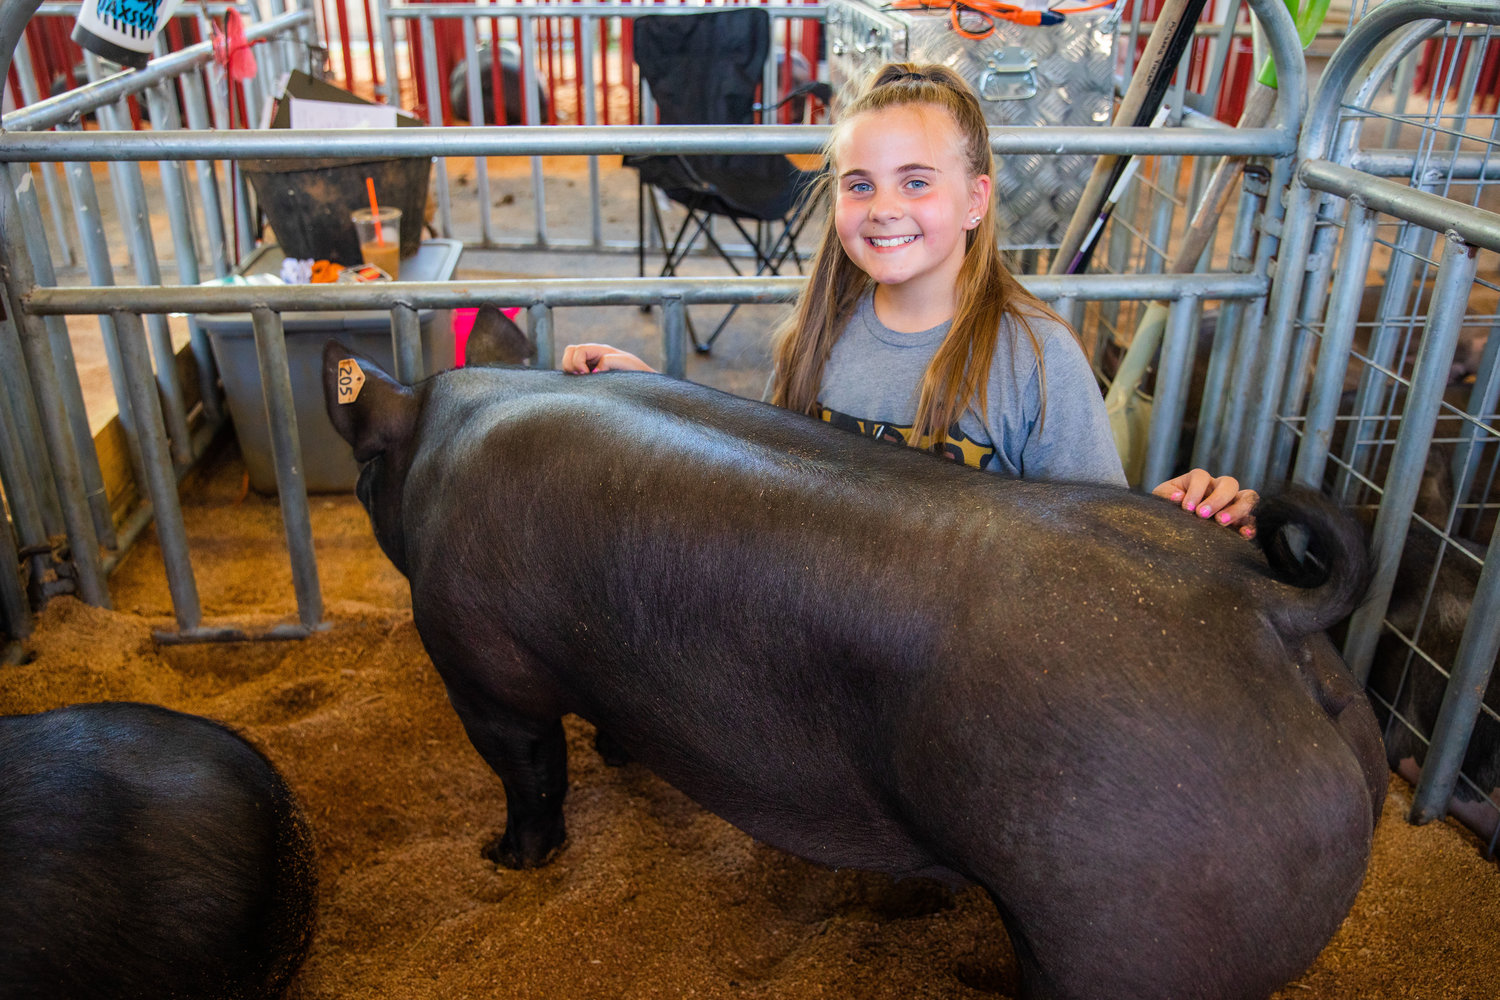 Little Miss Friendly candidate Jaxsyn Lowrey, 10, of Adna, smiles for a photo with her pig Nancy, a Hampshire and Yorkshire-mix, Monday afternoon at the Southwest Washington Fairgrounds in Centralia.